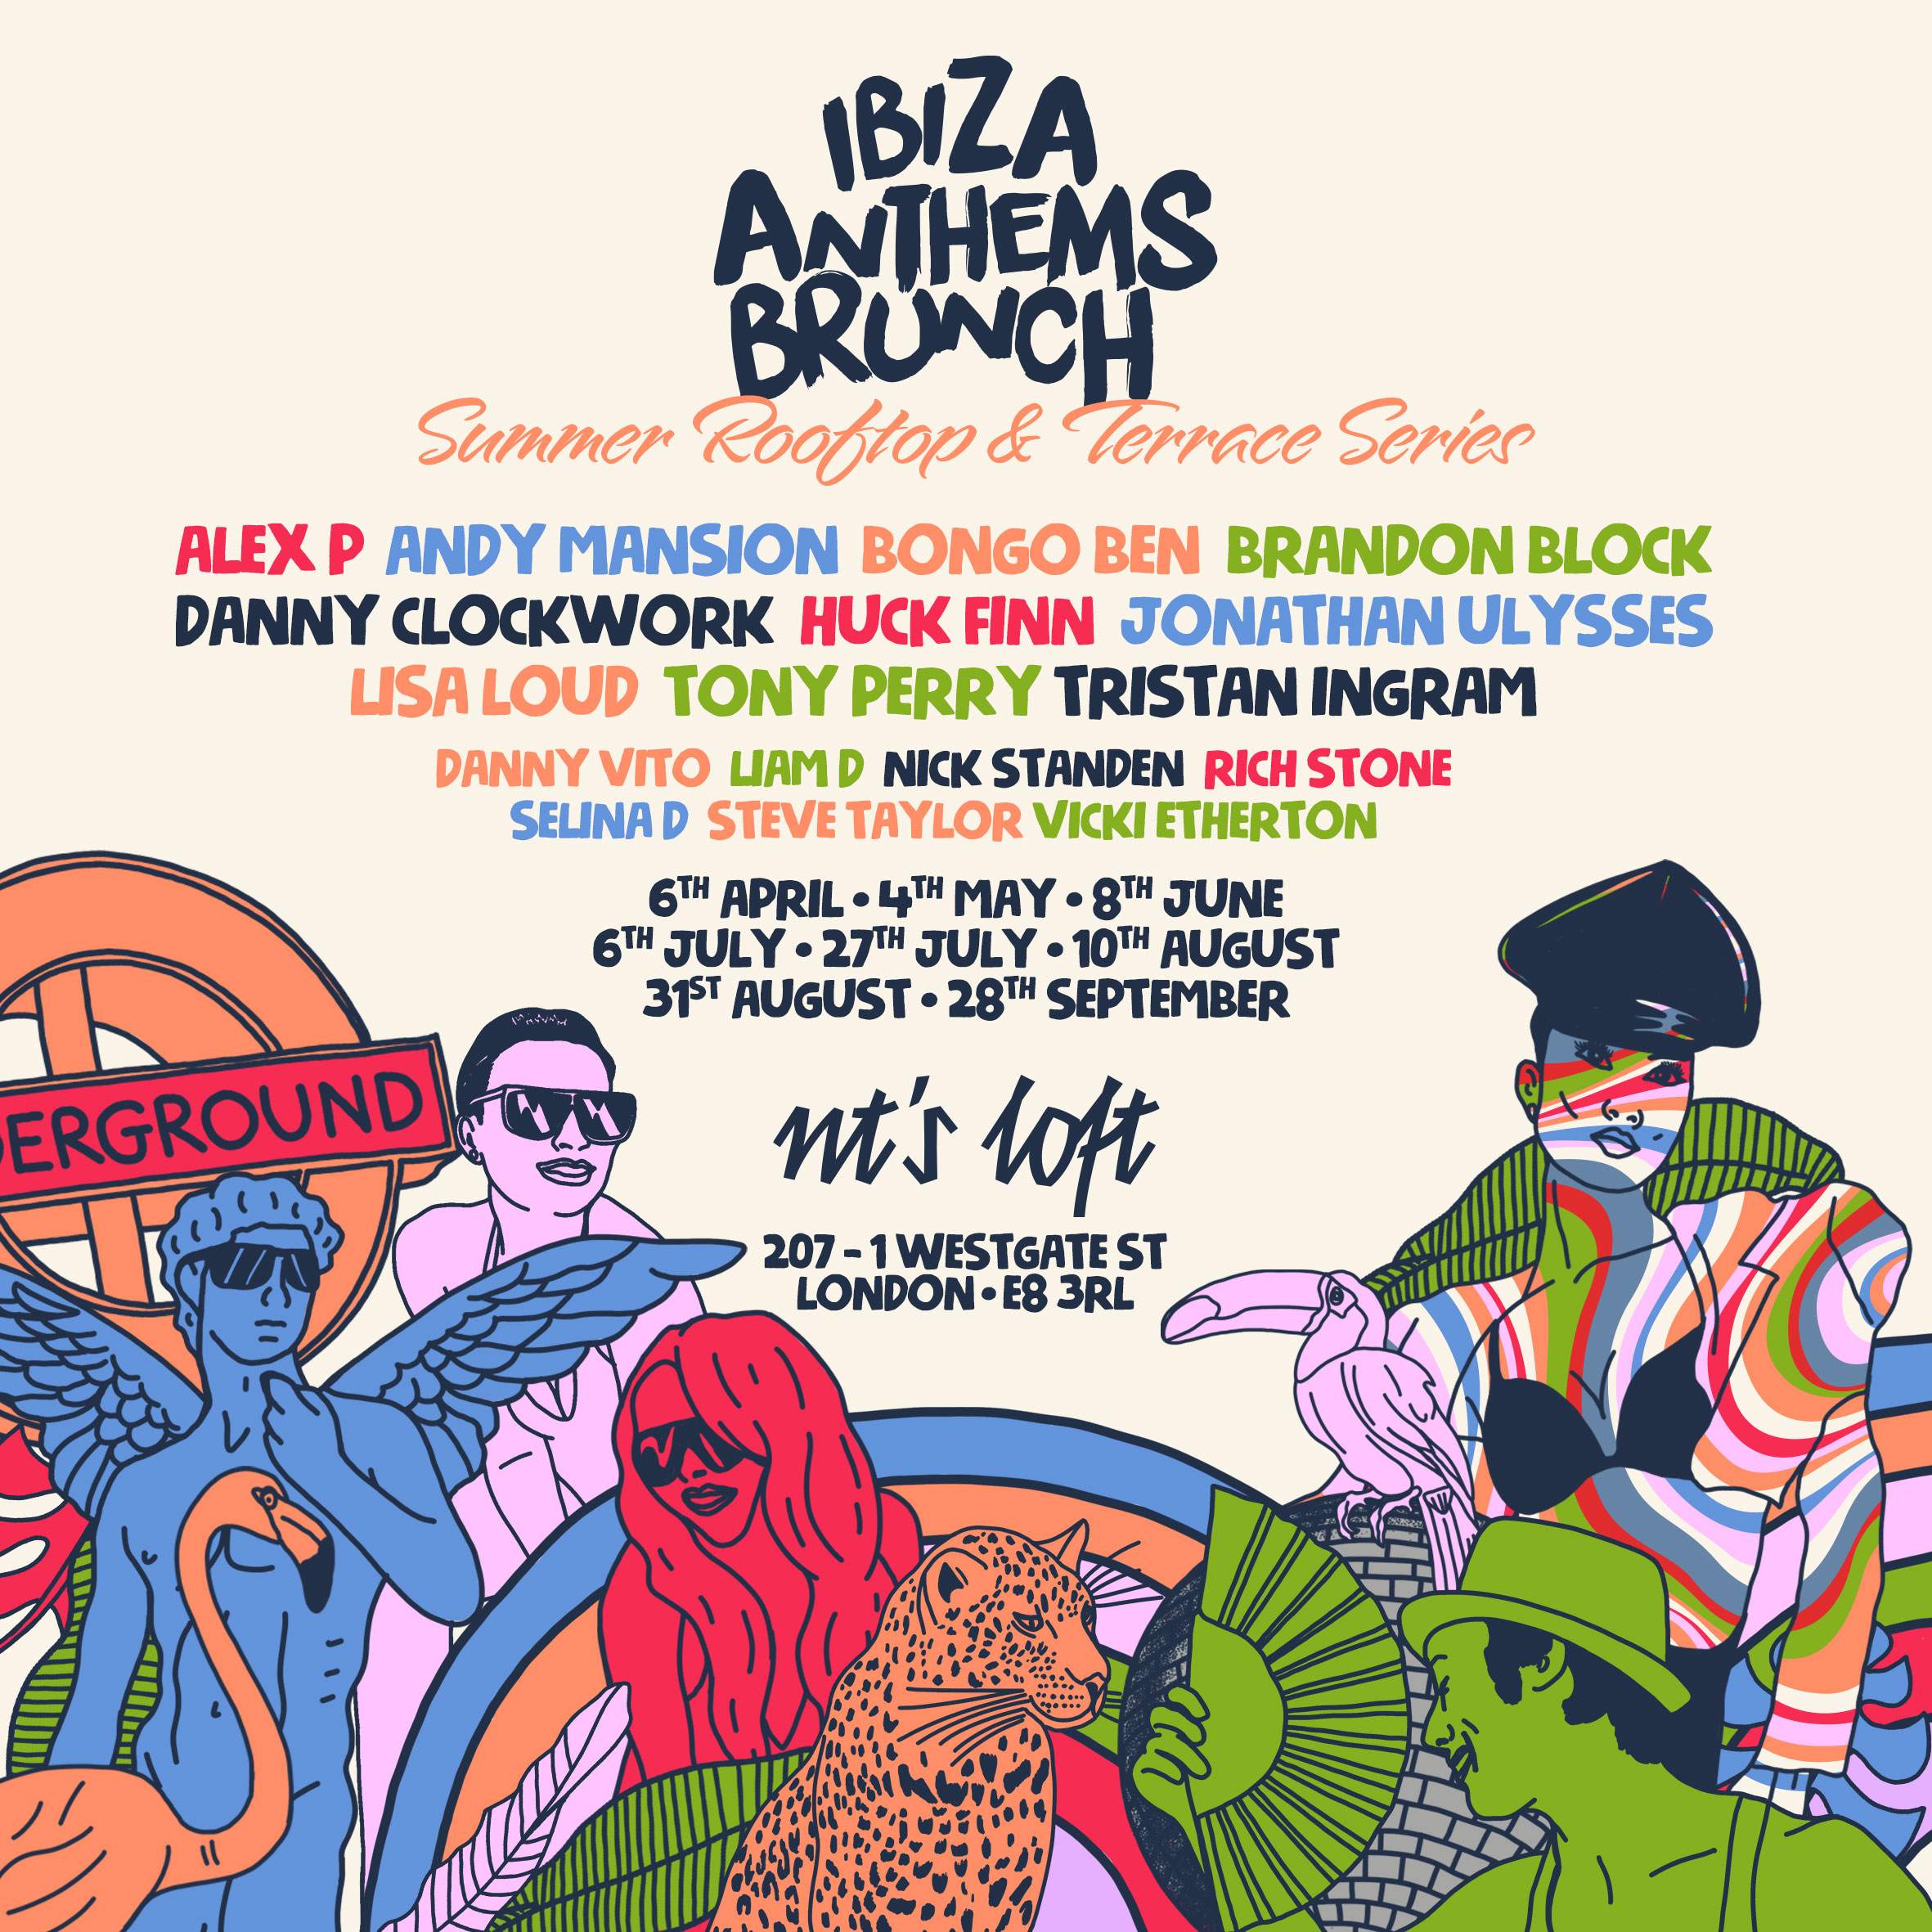 Ibiza Anthems Brunch Bank Holiday Rooftop Party - Página frontal